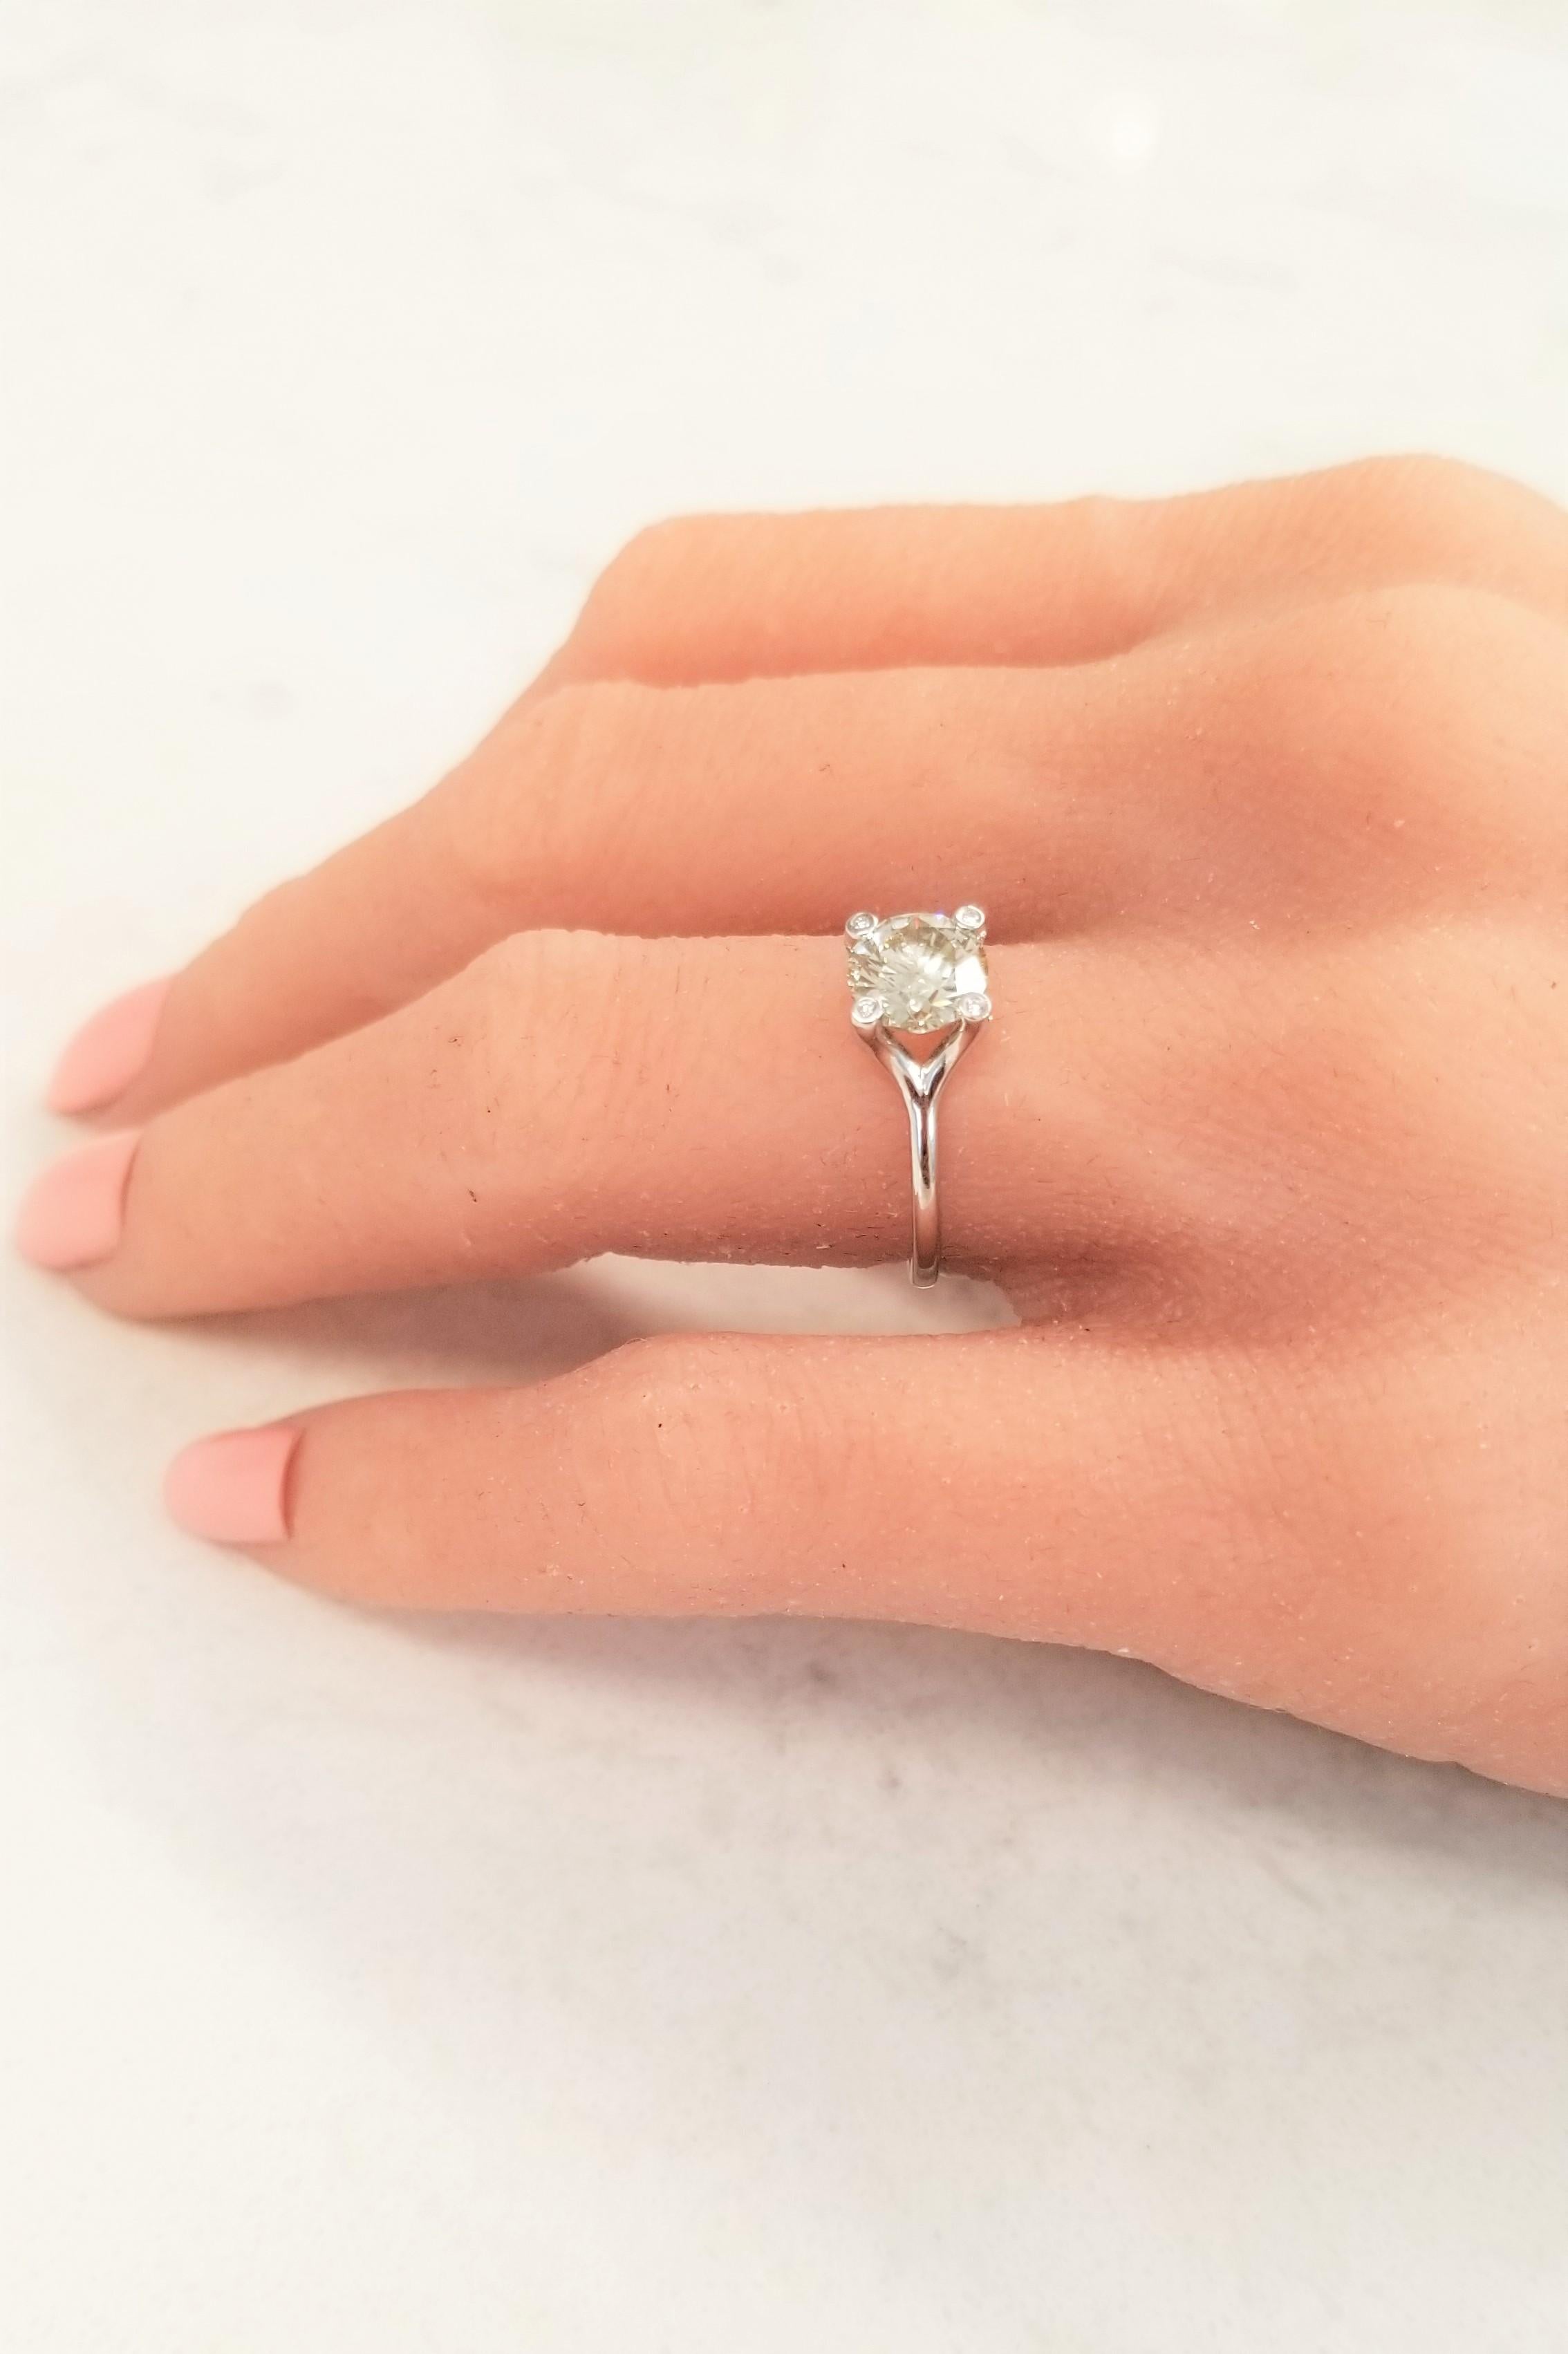 There is something so special about a high-quality sparkling diamond set in 18k white gold. The versatility is through the roof on this one! This solitaire features a sparkling 1.24 Carat fancy light brownish-greenish yellow diamond center. Worn